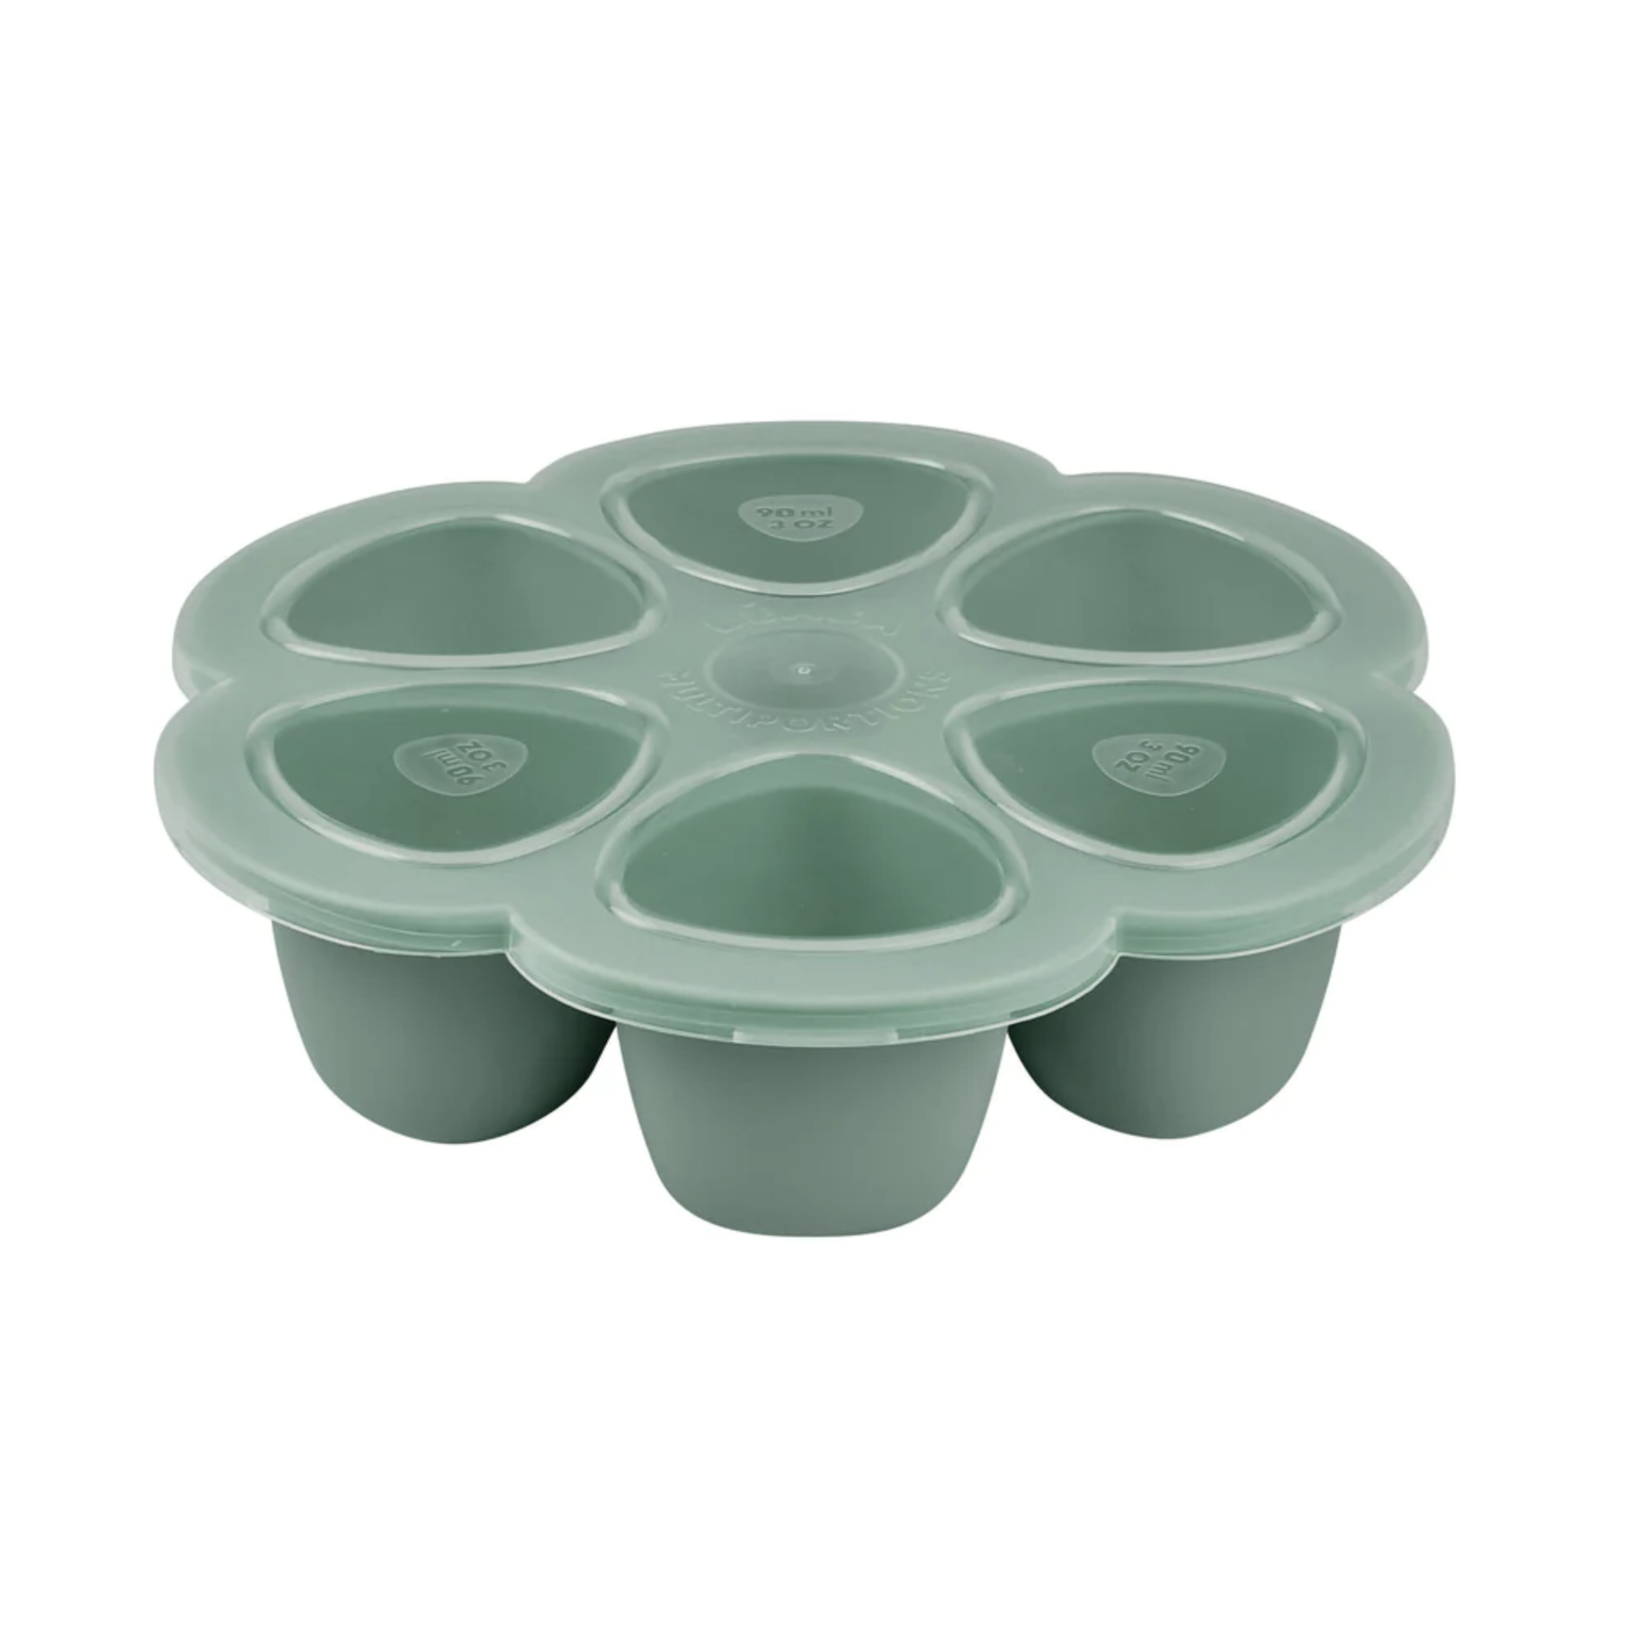 BEABA Multiportions Silicone Freezer Tray 6 X 90ml - Sage Green